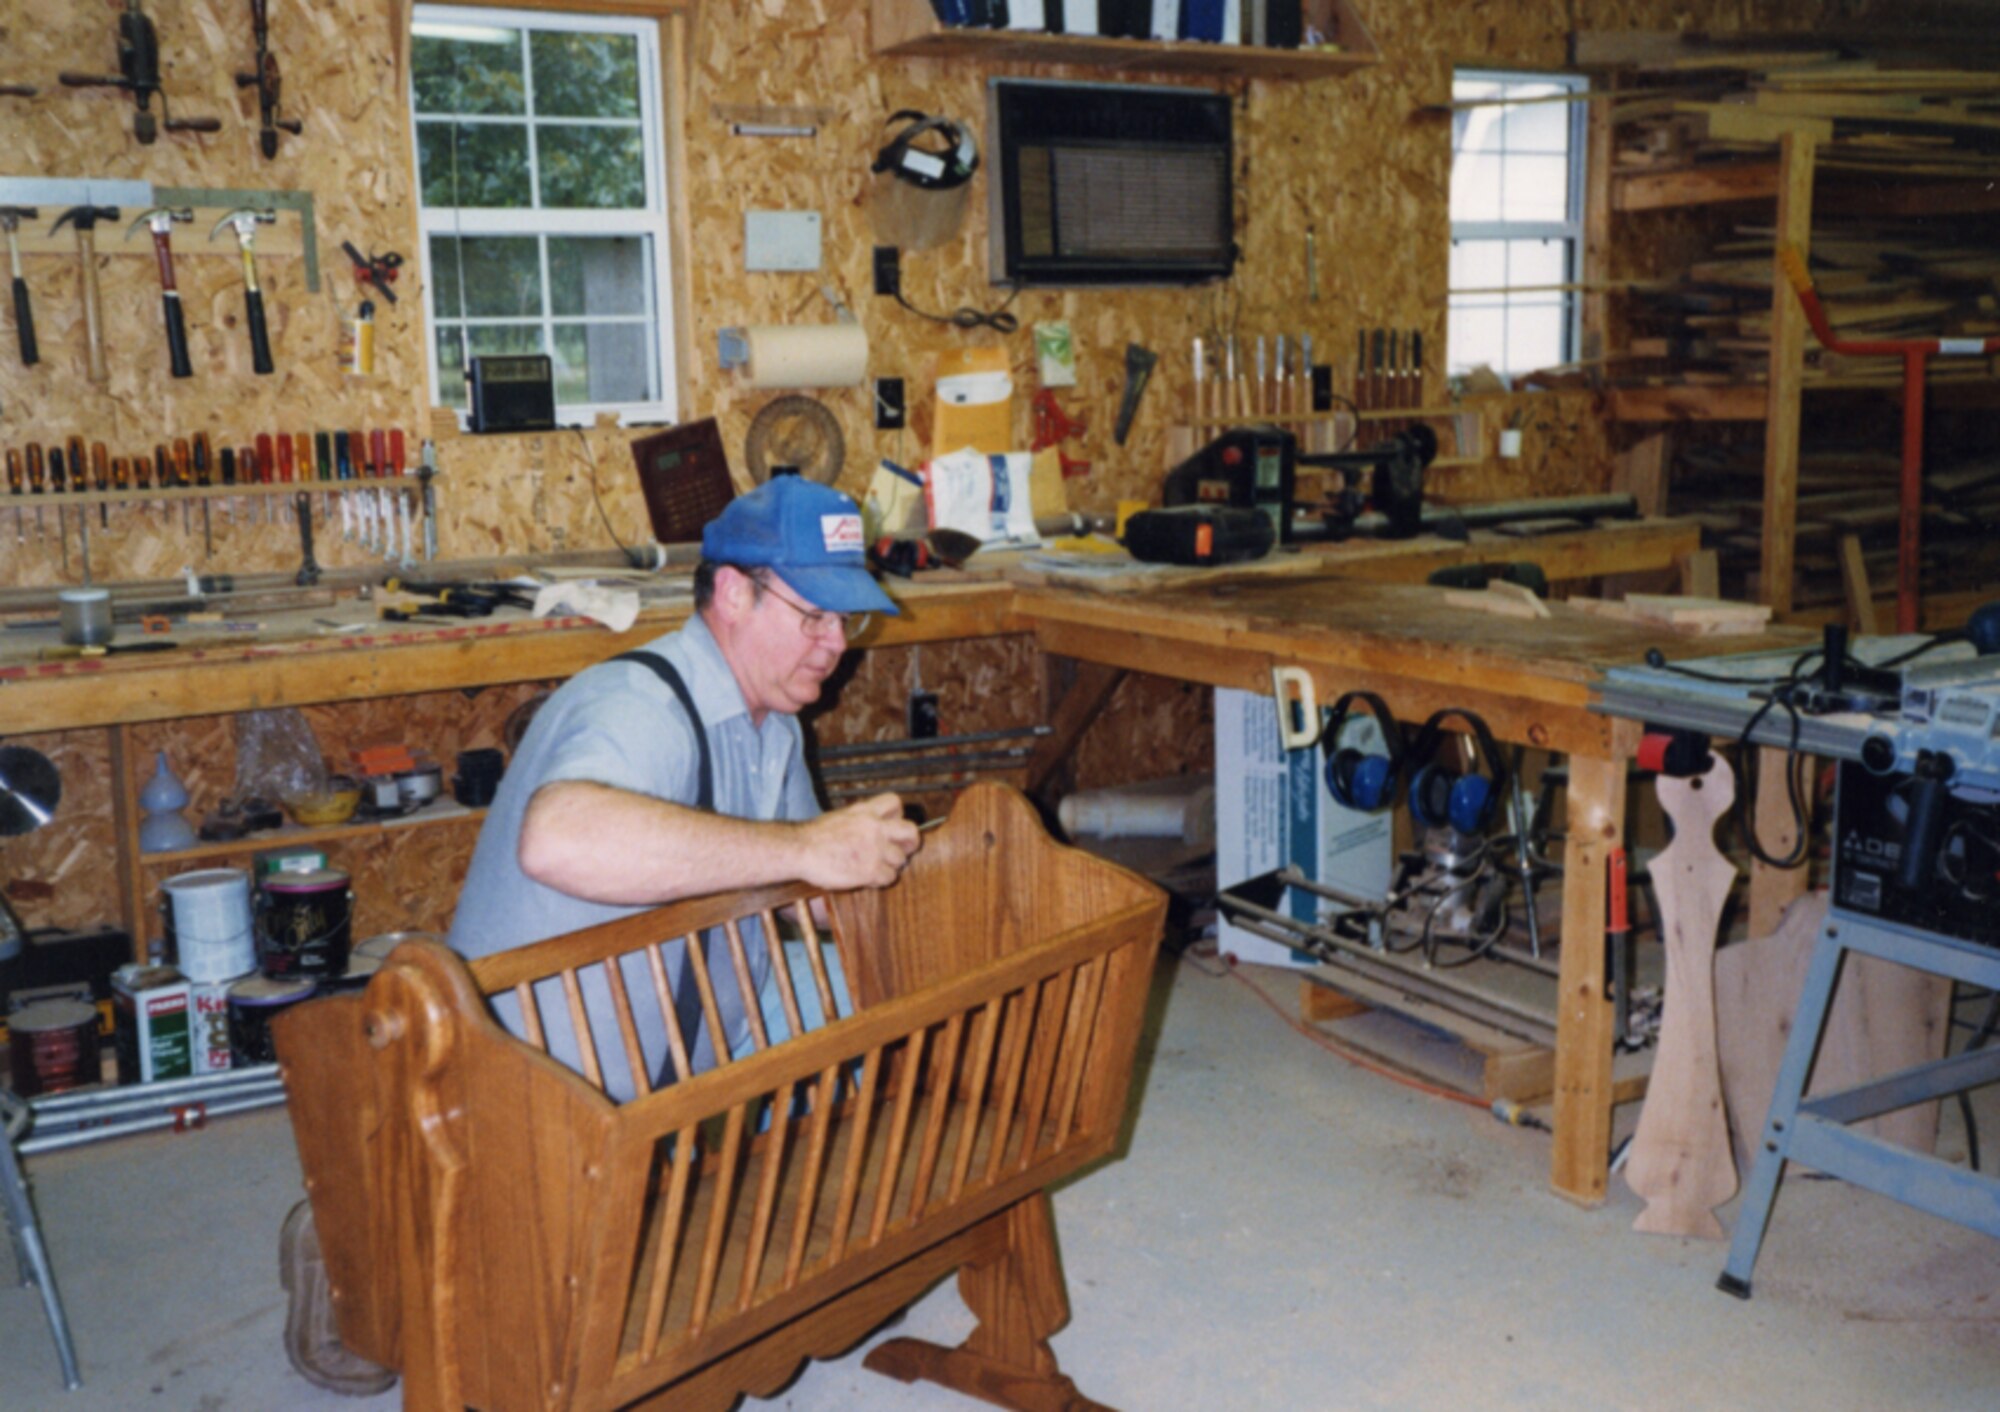 The Woodworking Shop in Action - Impact Ministries Canada